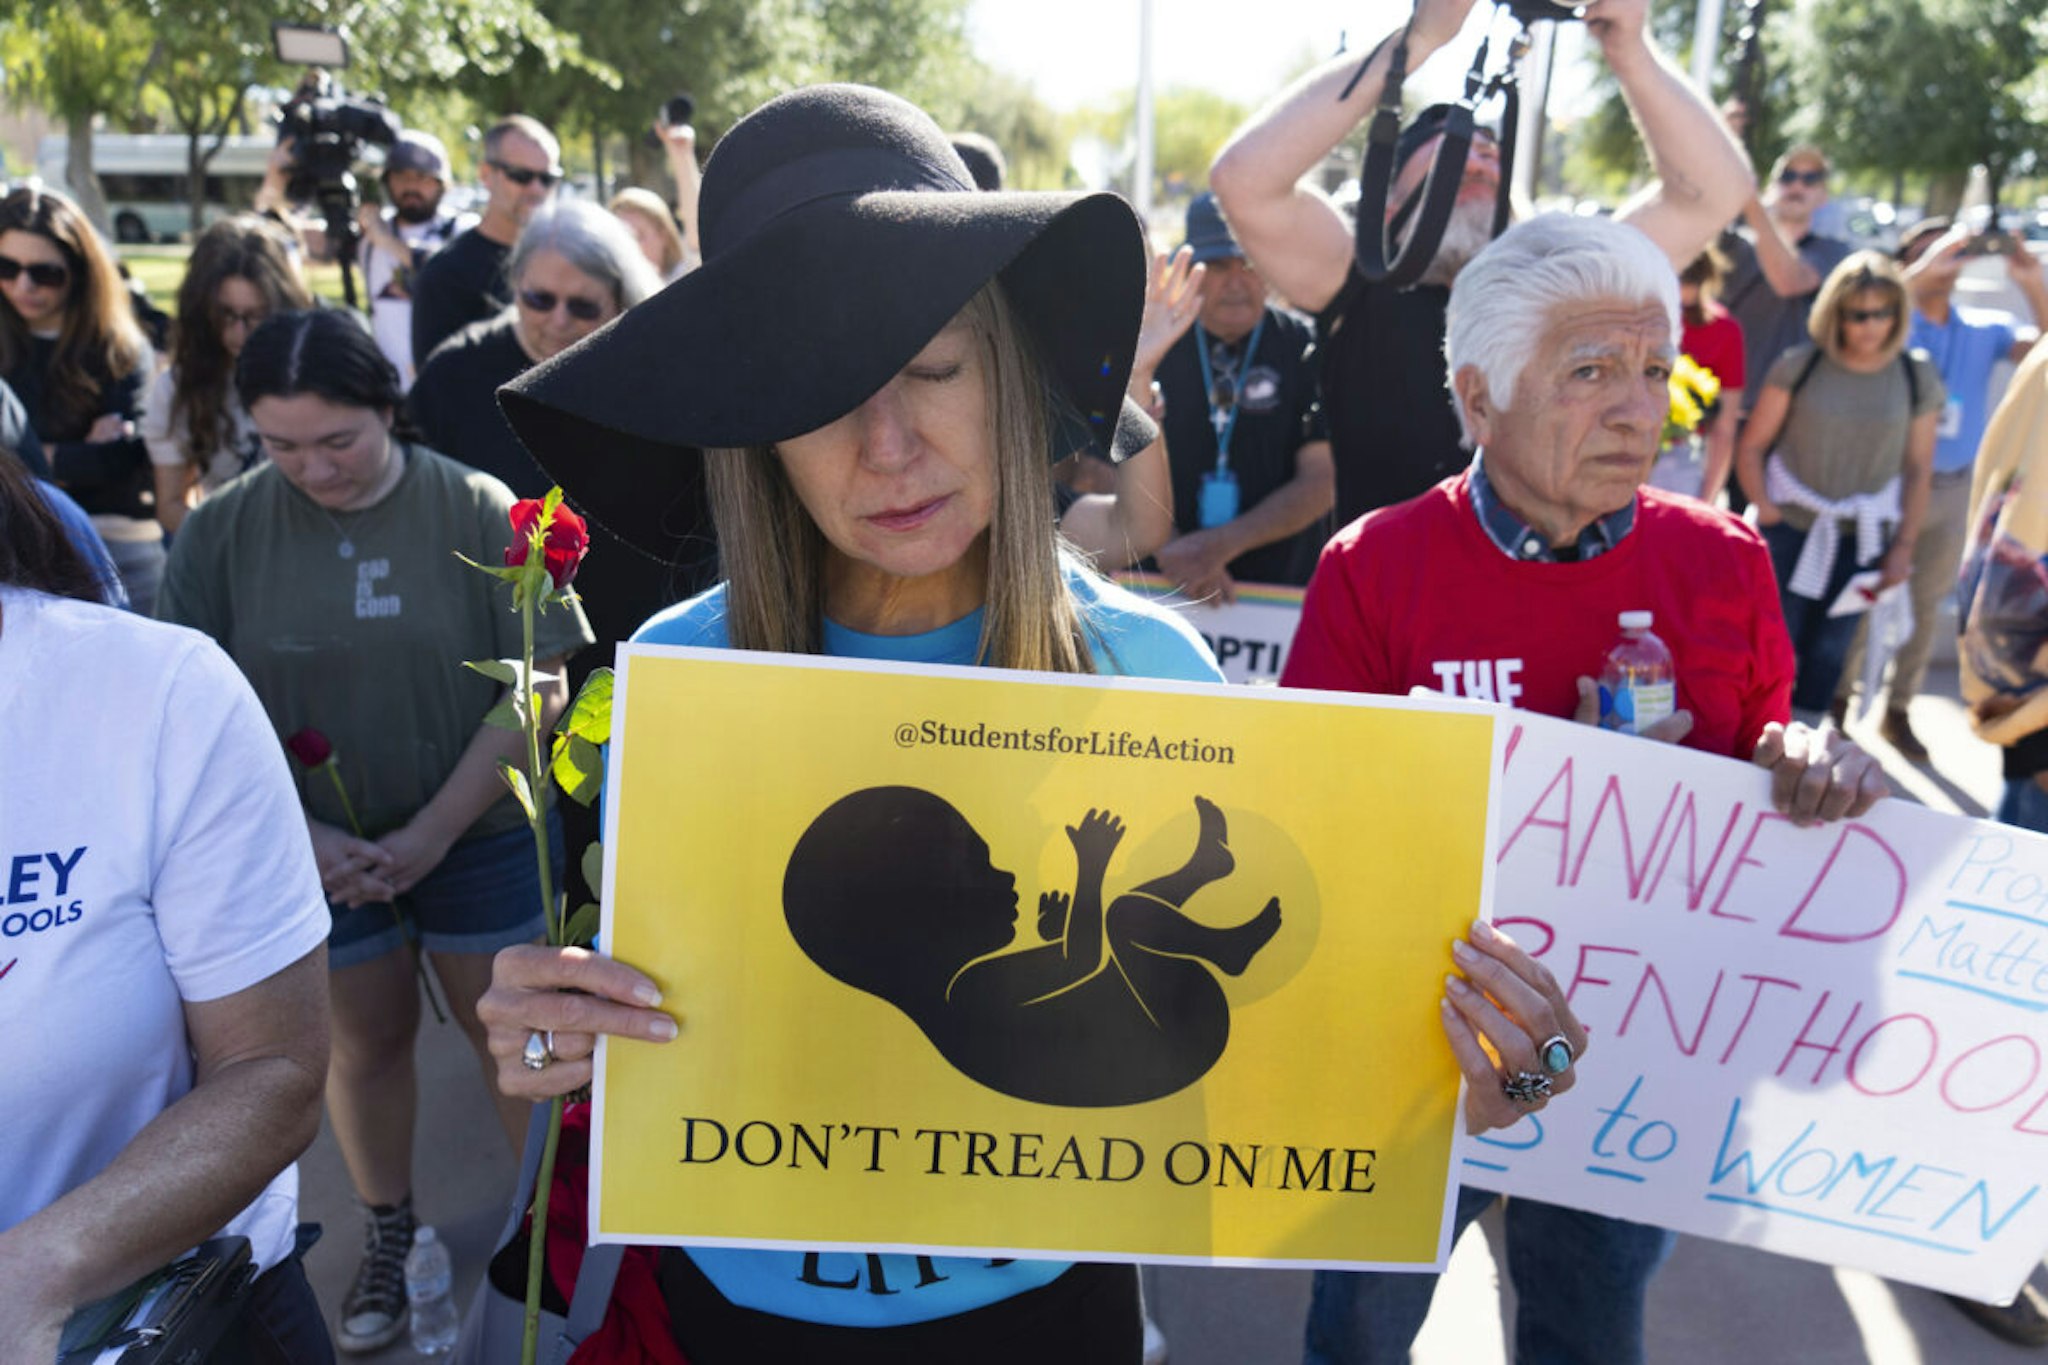 PHOENIX, ARIZONA - APRIL 17: Anti-abortion advocates demonstrate prior to an Arizona House of Representatives session at the Arizona State Capitol on April 17, 2024 in Phoenix, Arizona. Arizona House Republicans blocked the Democrats from holding a vote to overturn the 1864 abortion ban revived last week by the Arizona Supreme Court.